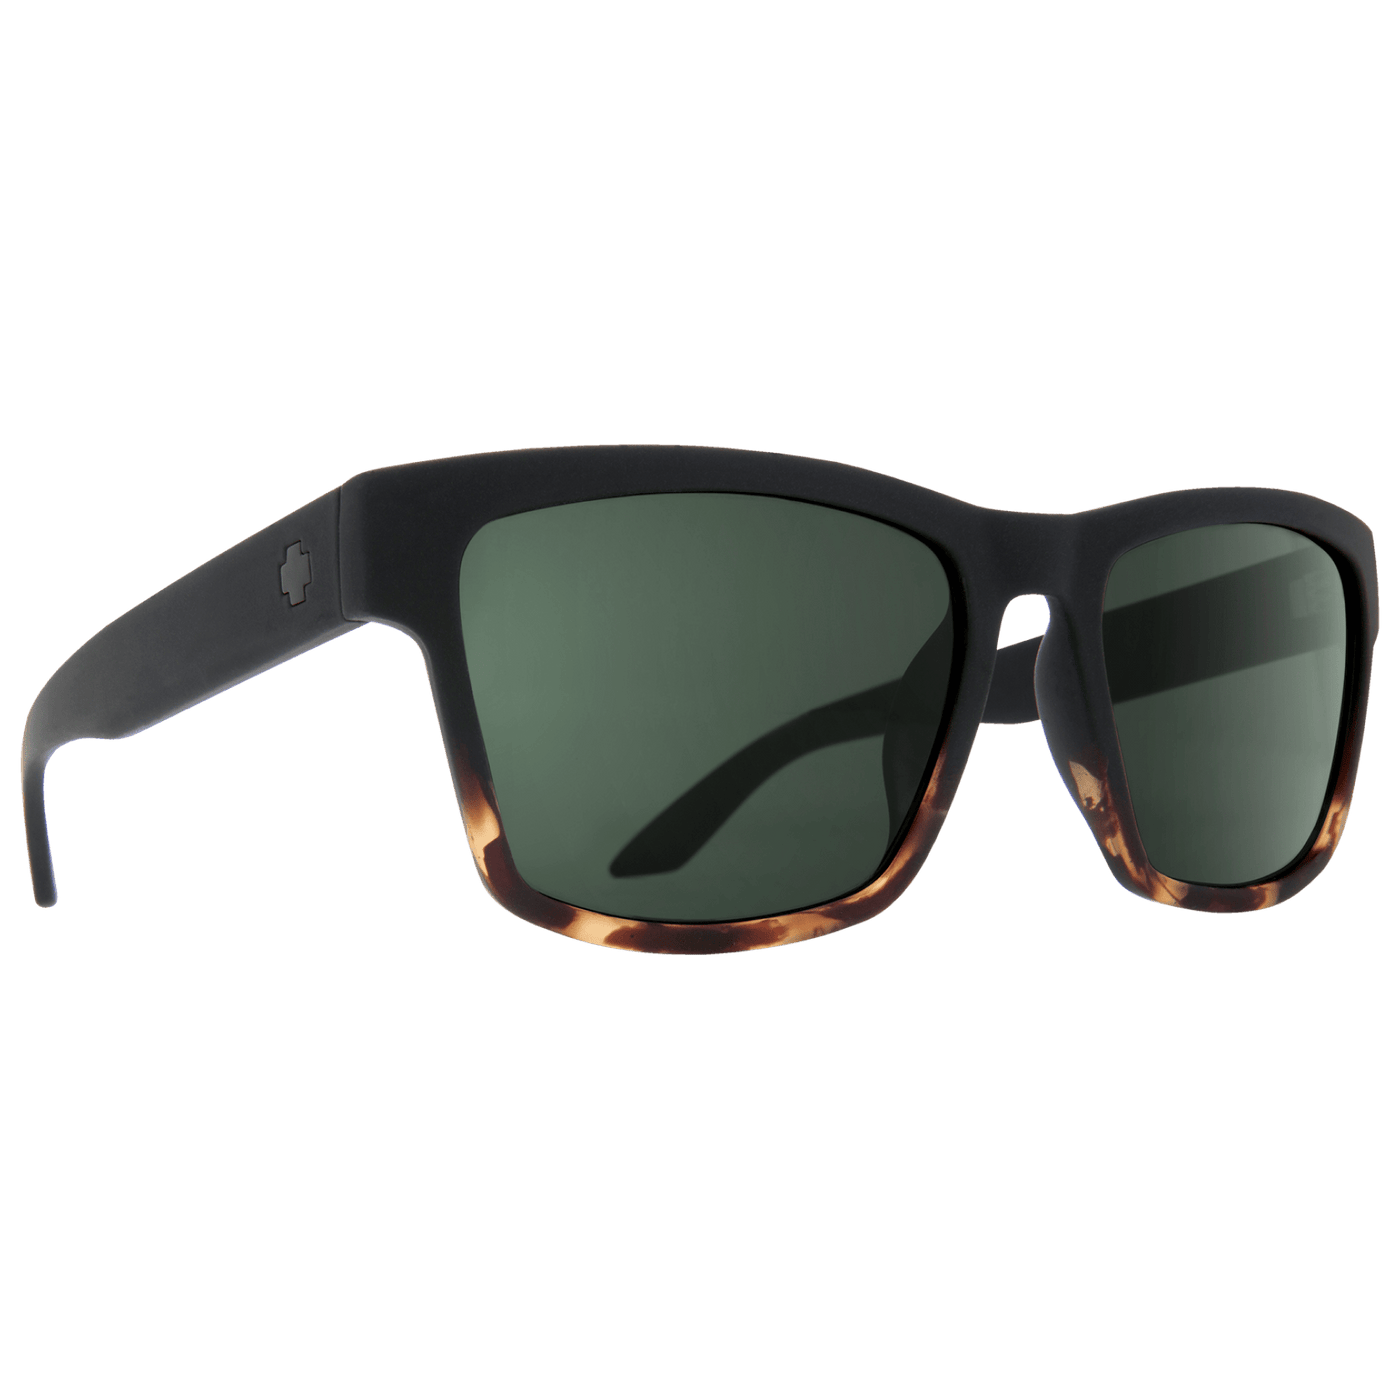 SPY HAIGHT 2 Sunglasses, Happy Lens - Tort Fade 8Lines Shop - Fast Shipping